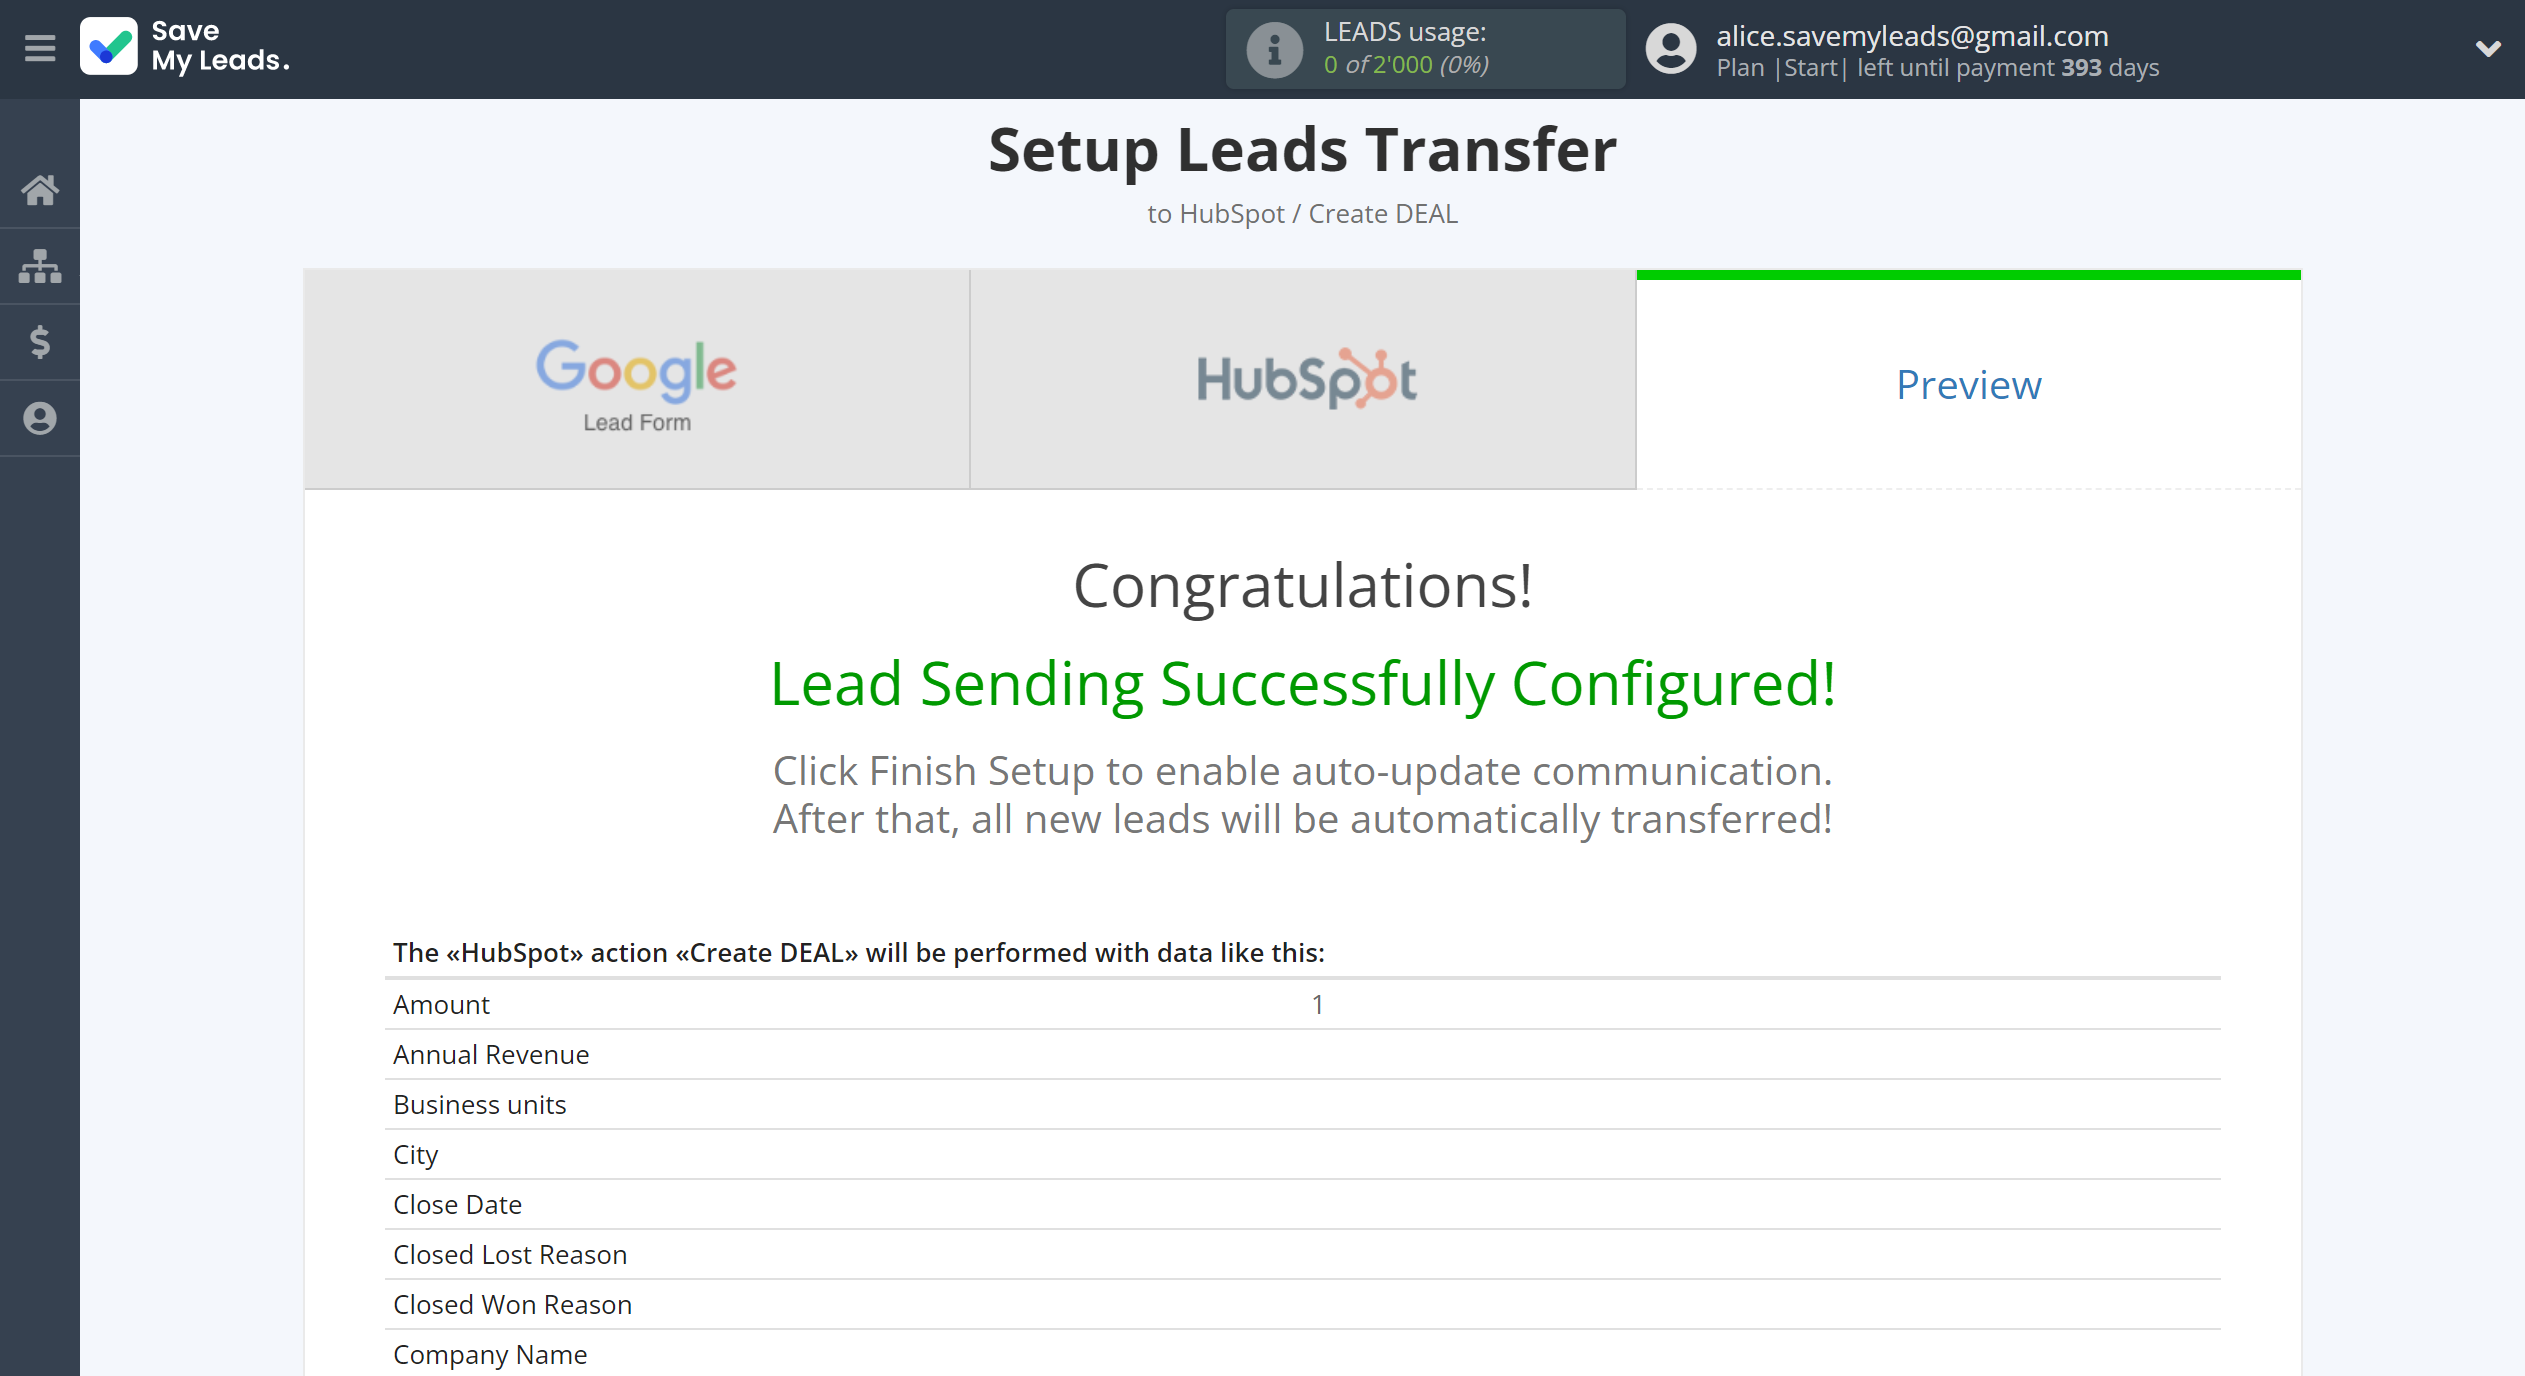 How to Connect Google Lead Form with HubSpot Create Deal | Test data